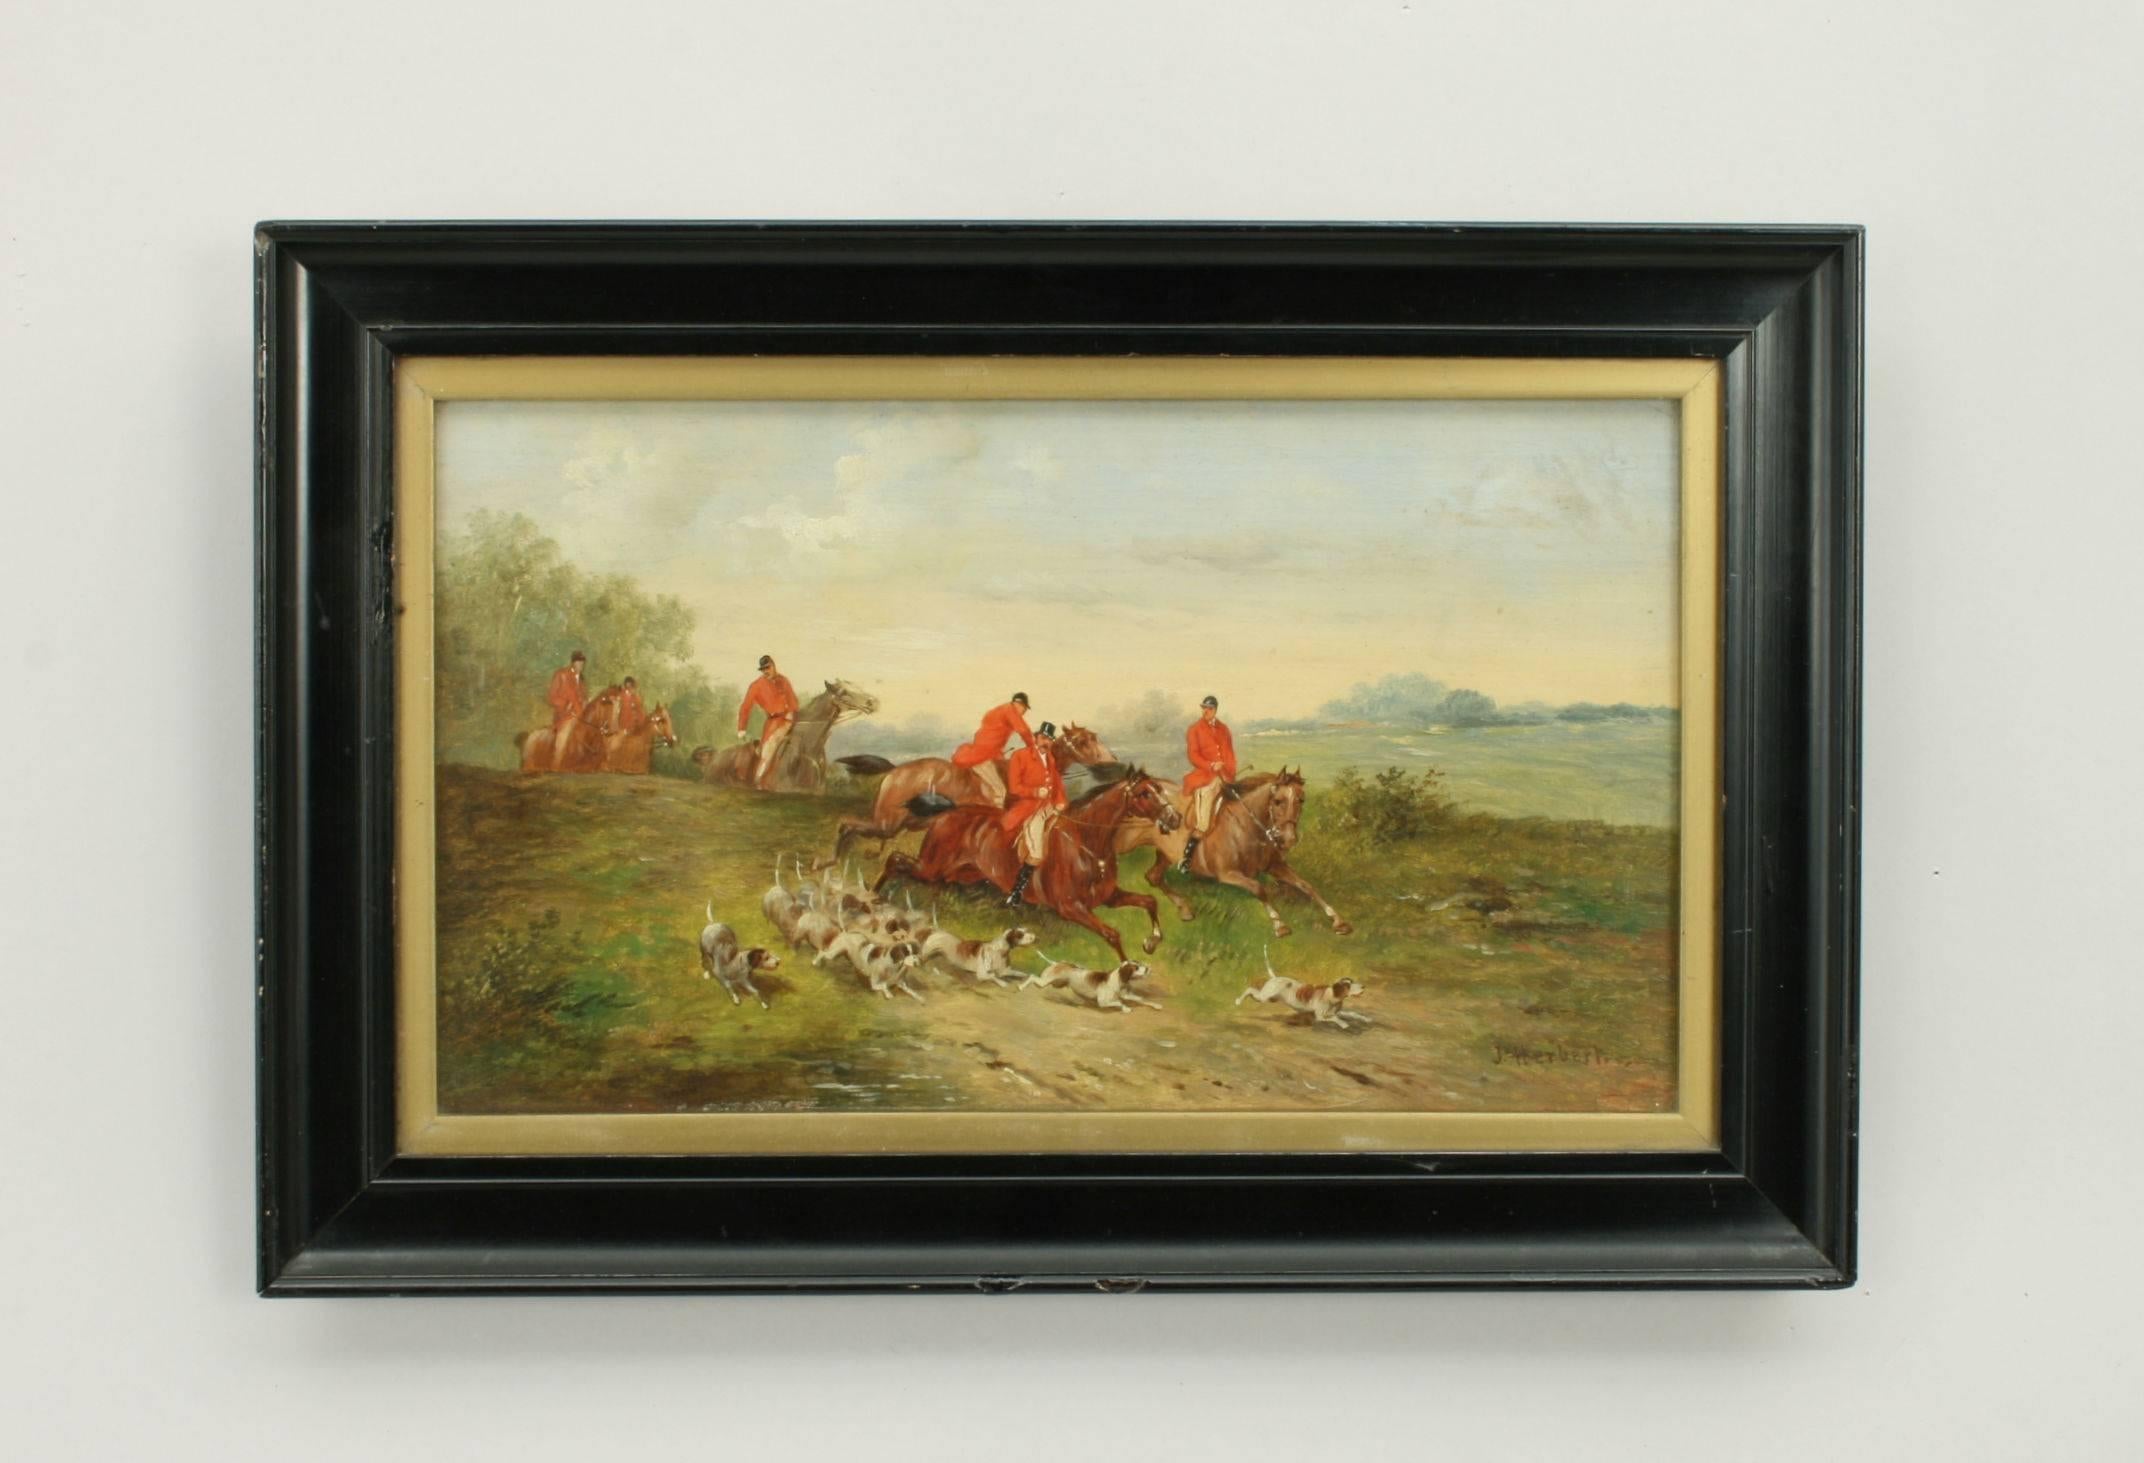 Equestrian fox hunting paintings.
A pair of fine hunting paintings by J. Herbert. The colourful pair of fox hunting oil on board paintings are signed in the lower right-hand corner 'J. Herbert'. A very nice pair of small oil paintings in original